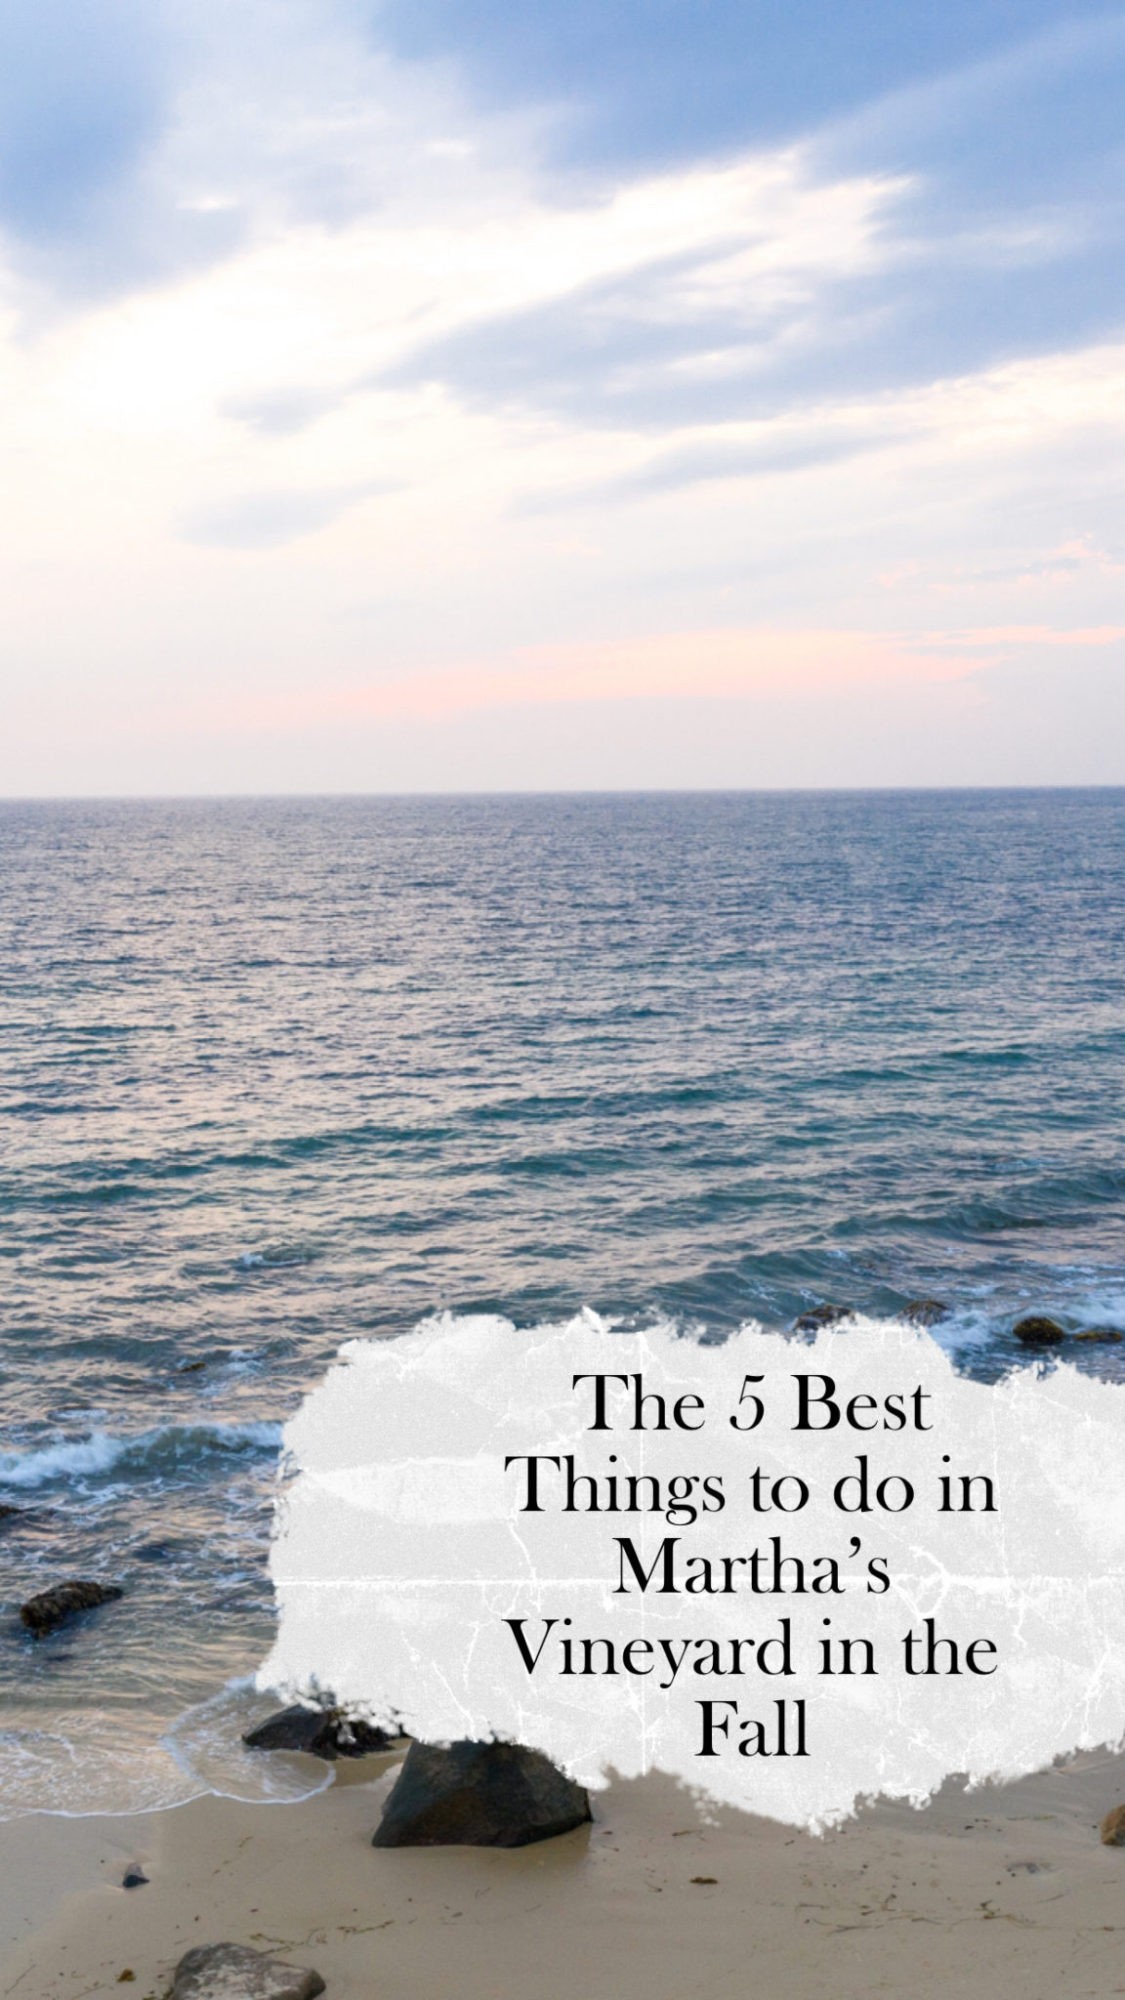 The 5 Best Things to do in Martha's Vineyard in October featured by top New England travel blogger, Shannon Shipman